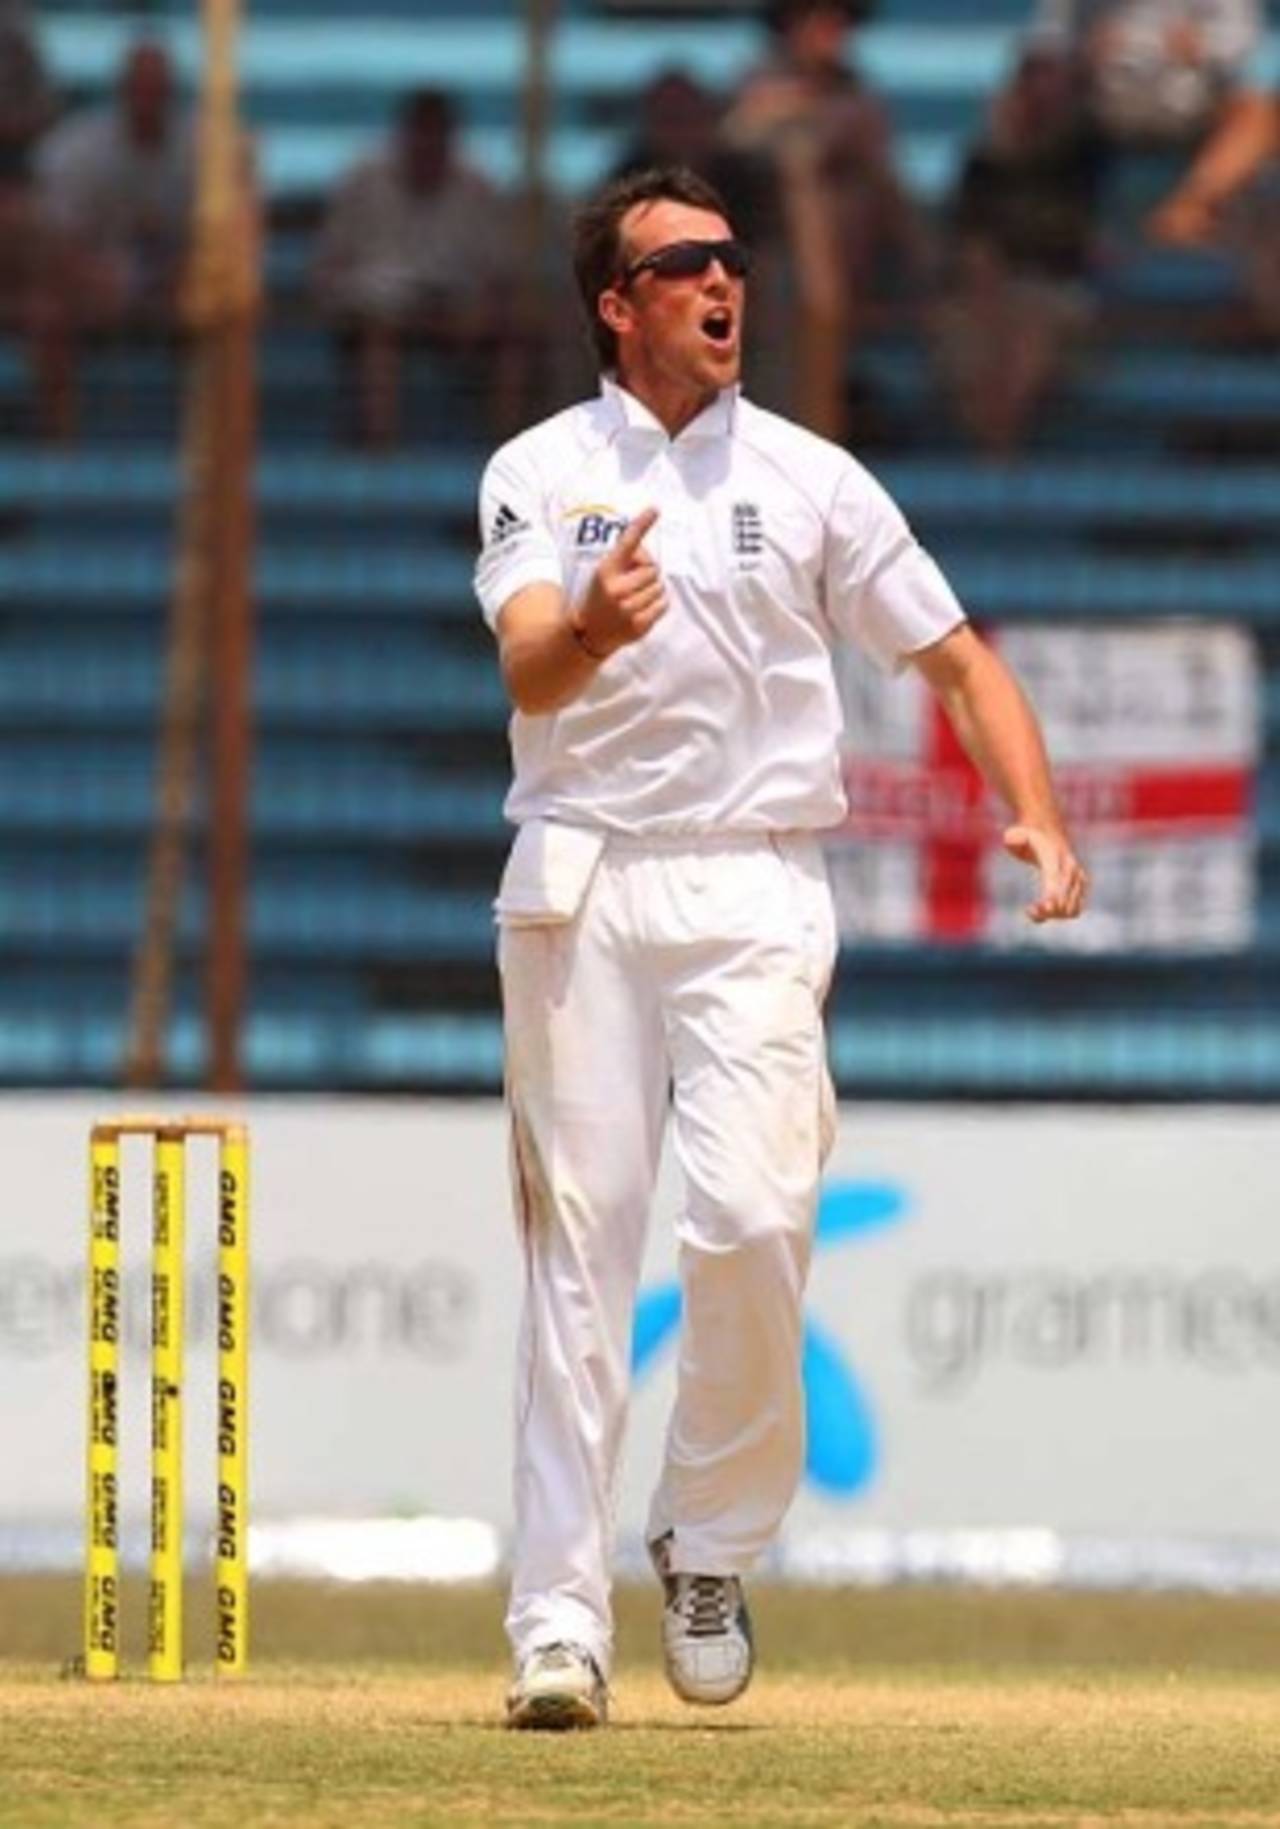 Graeme Swann was England's matchwinner with 10 wickets in the match, Bangladesh v England, 1st Test, Chittagong, March 16, 2010